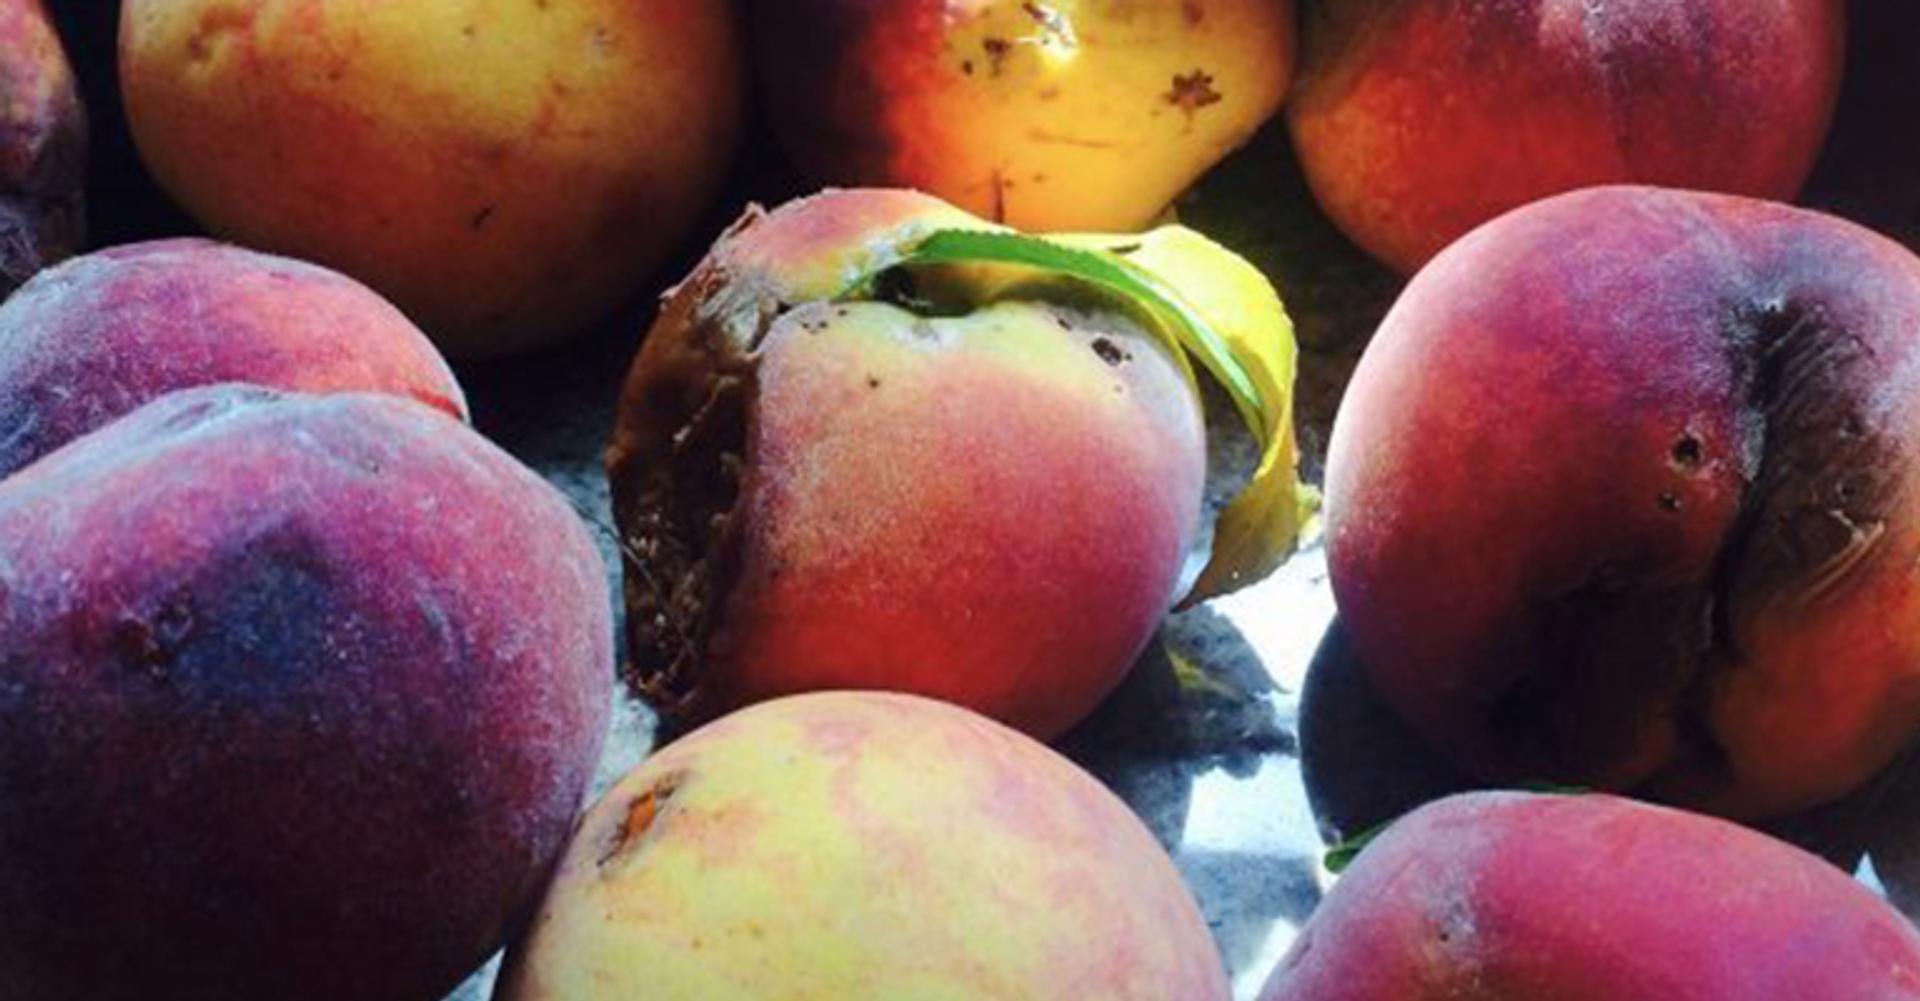 A pile of peaches that have bruises and spots.